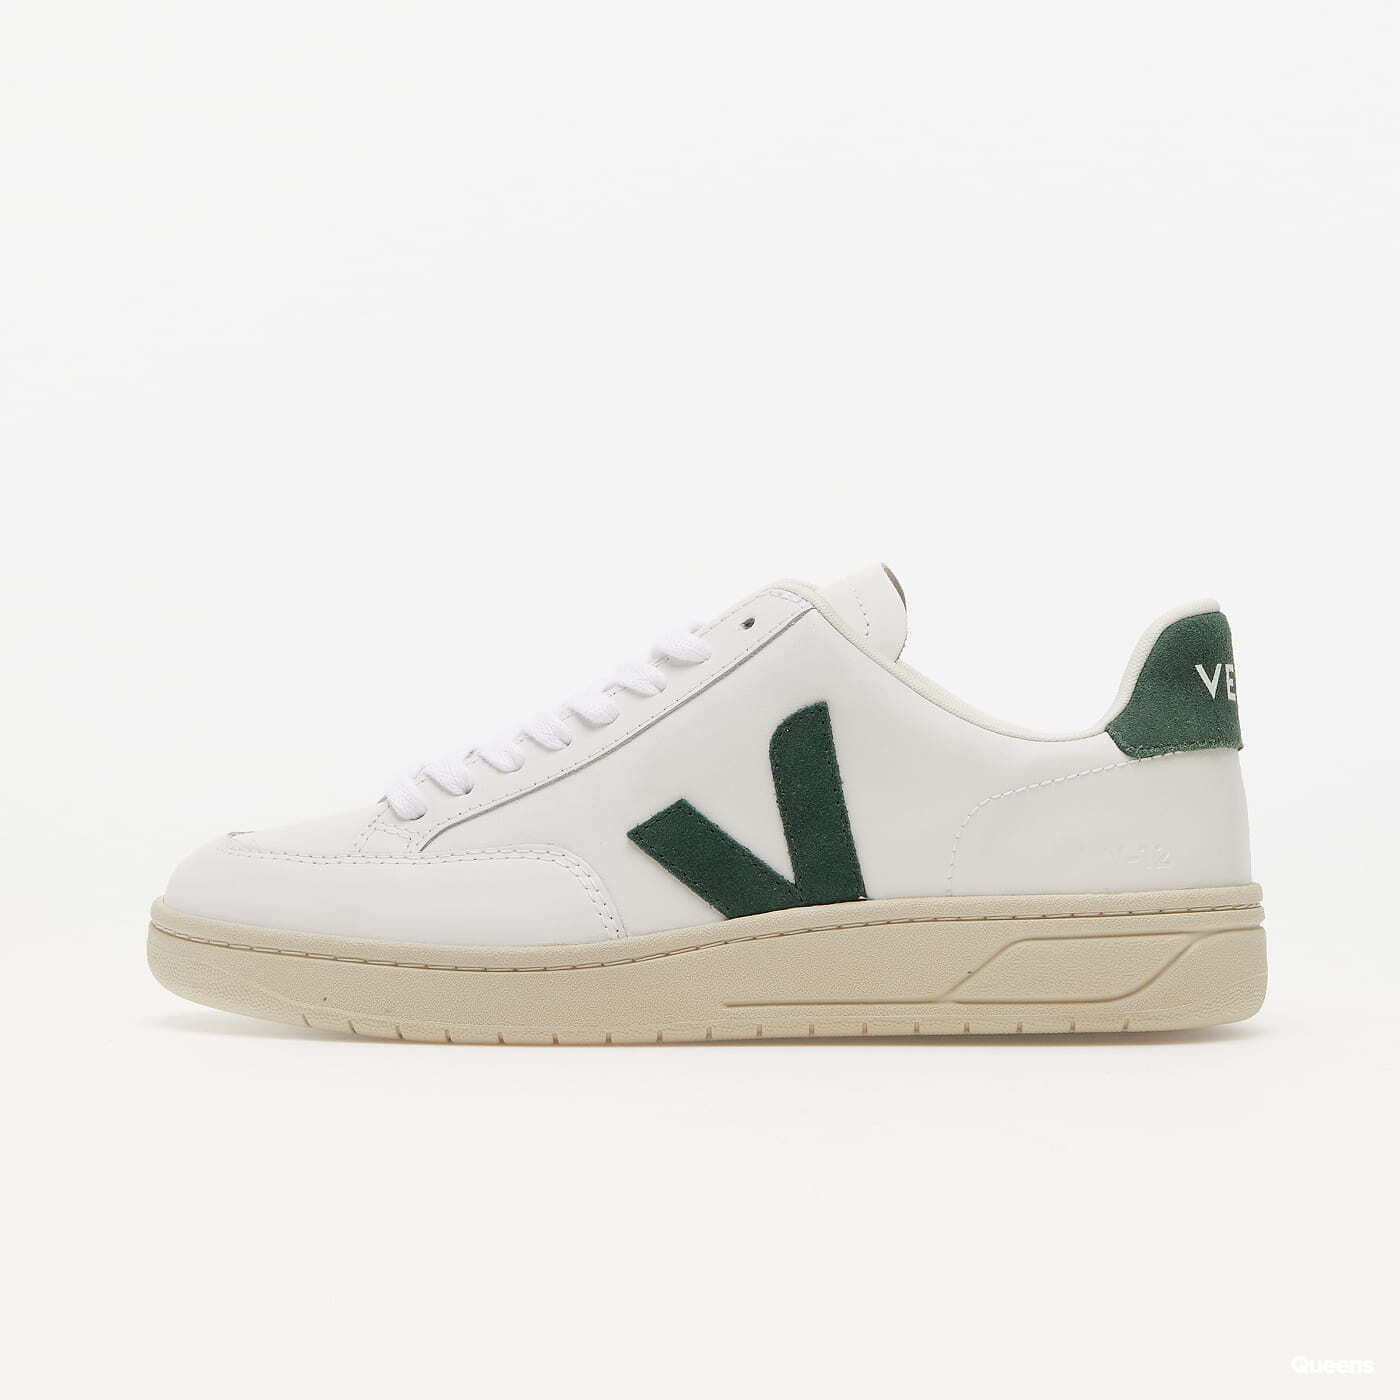 Men's sneakers and shoes Veja V-12 Leather Extra White/ Cyprus